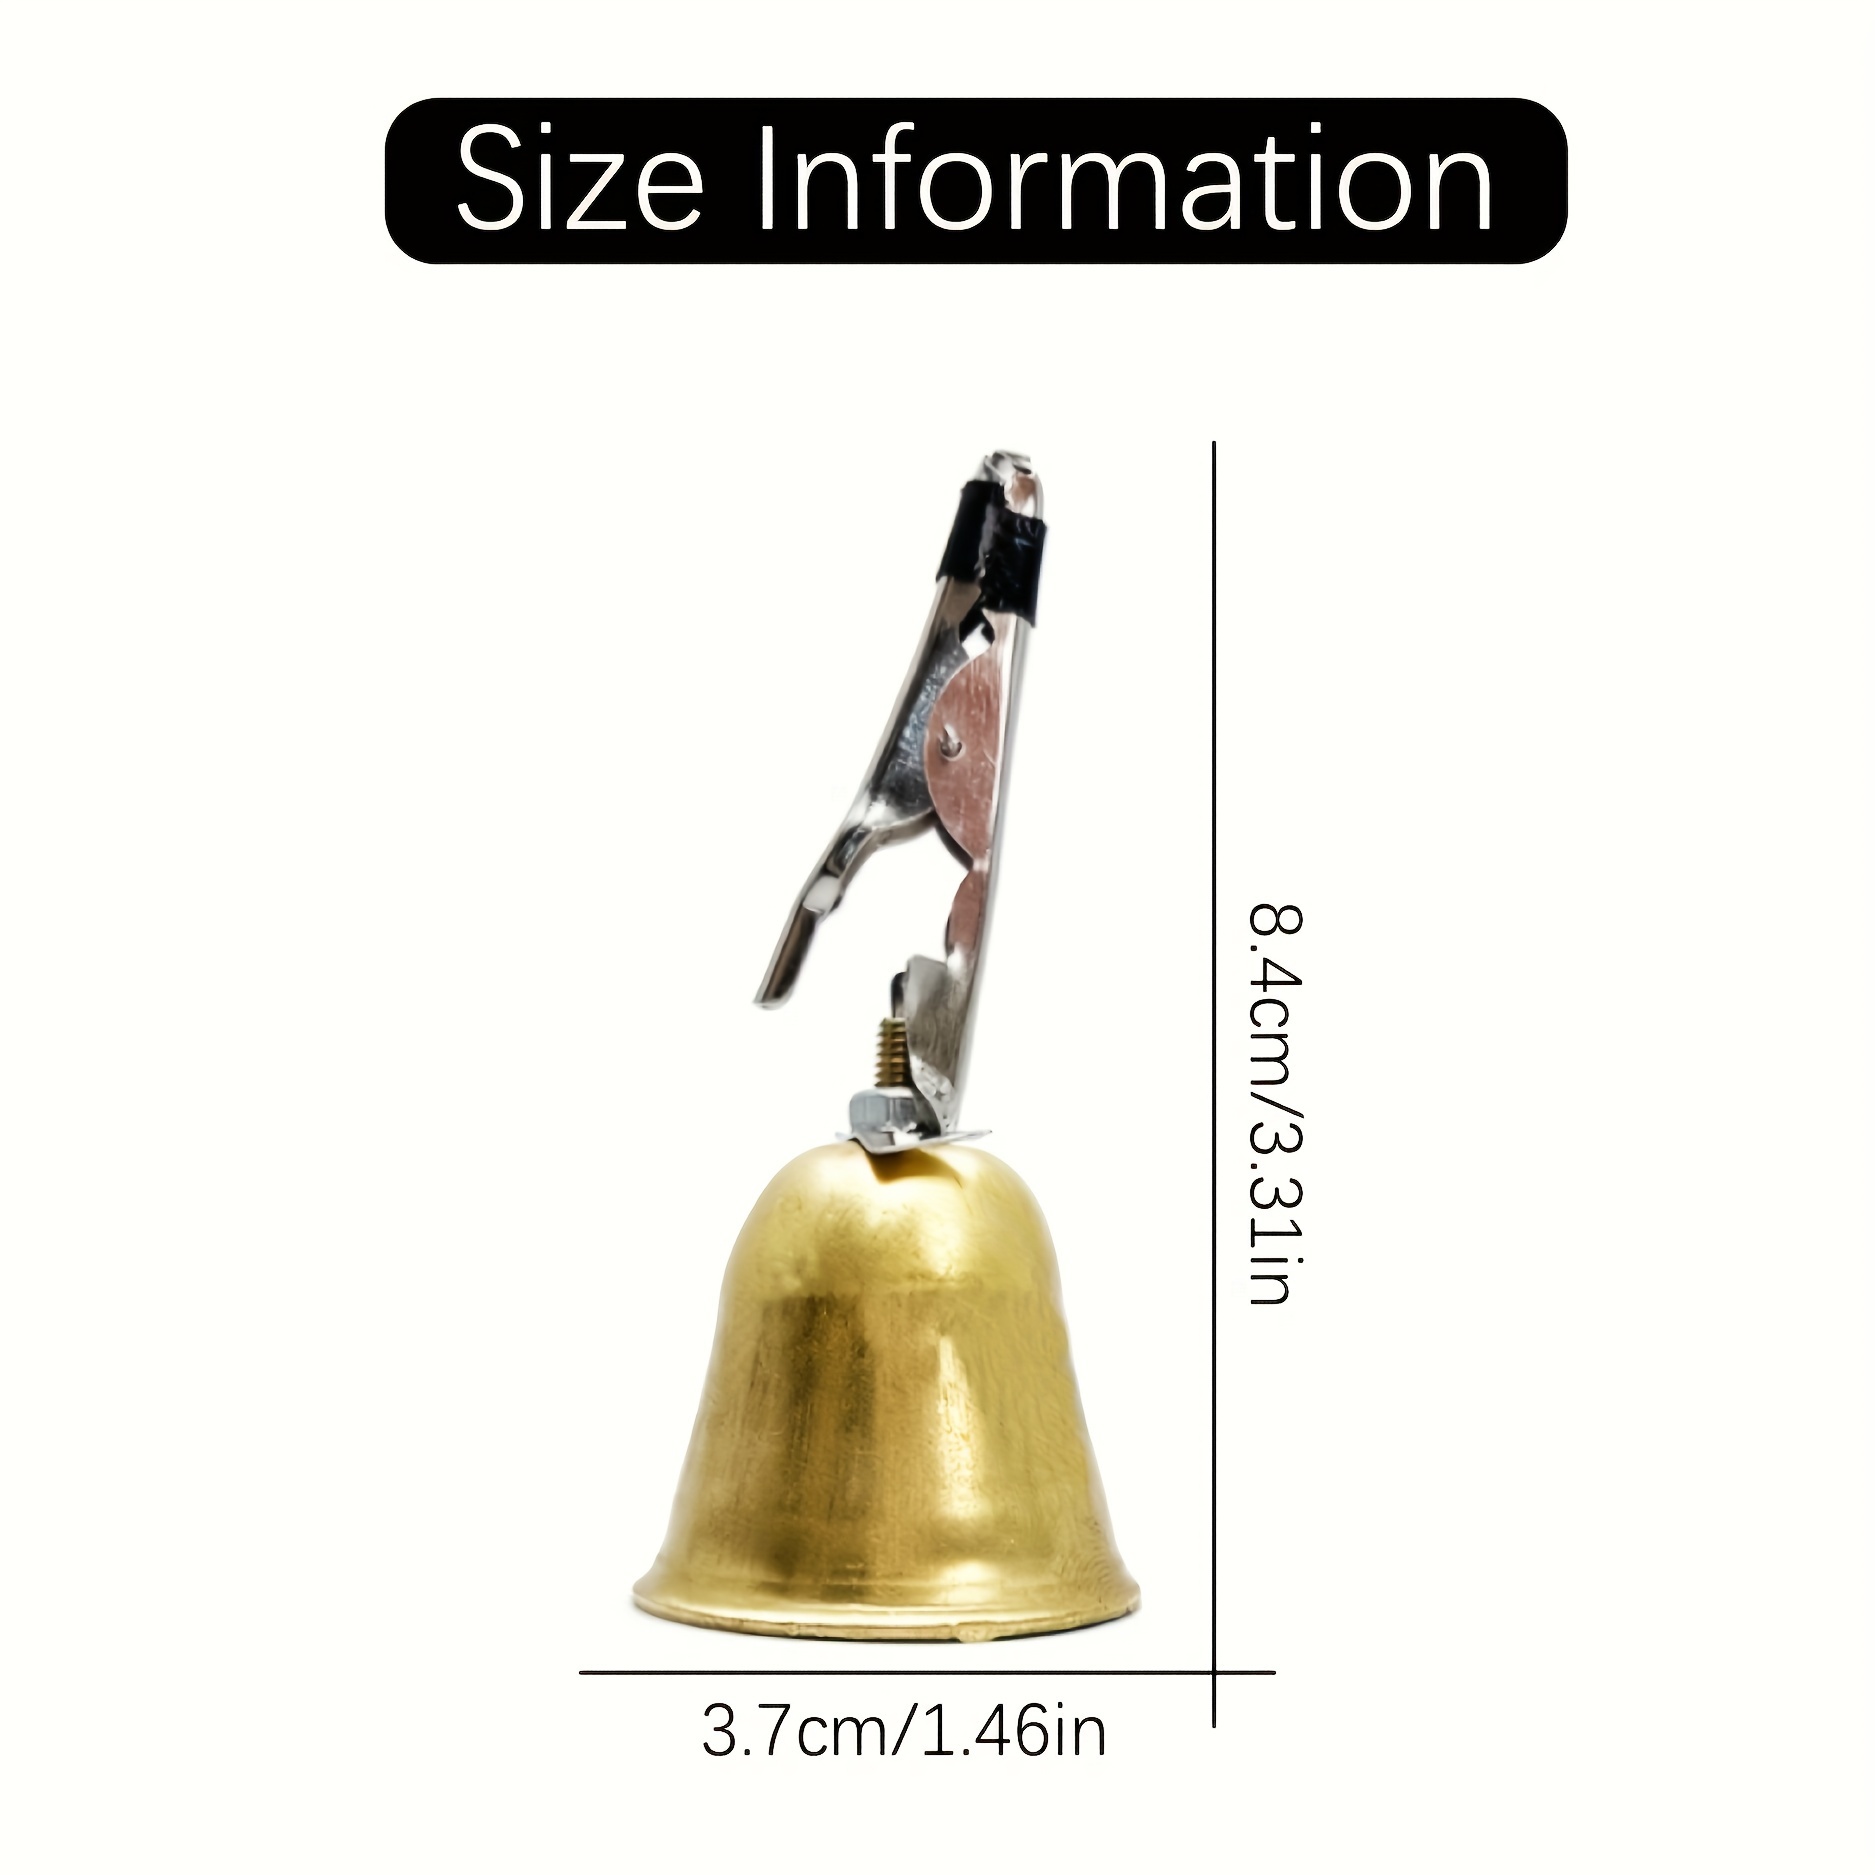 * 2pcs/4pcs Fishing Copper Bell Alert With Clamp, Clip-on Rod Bite Indicator